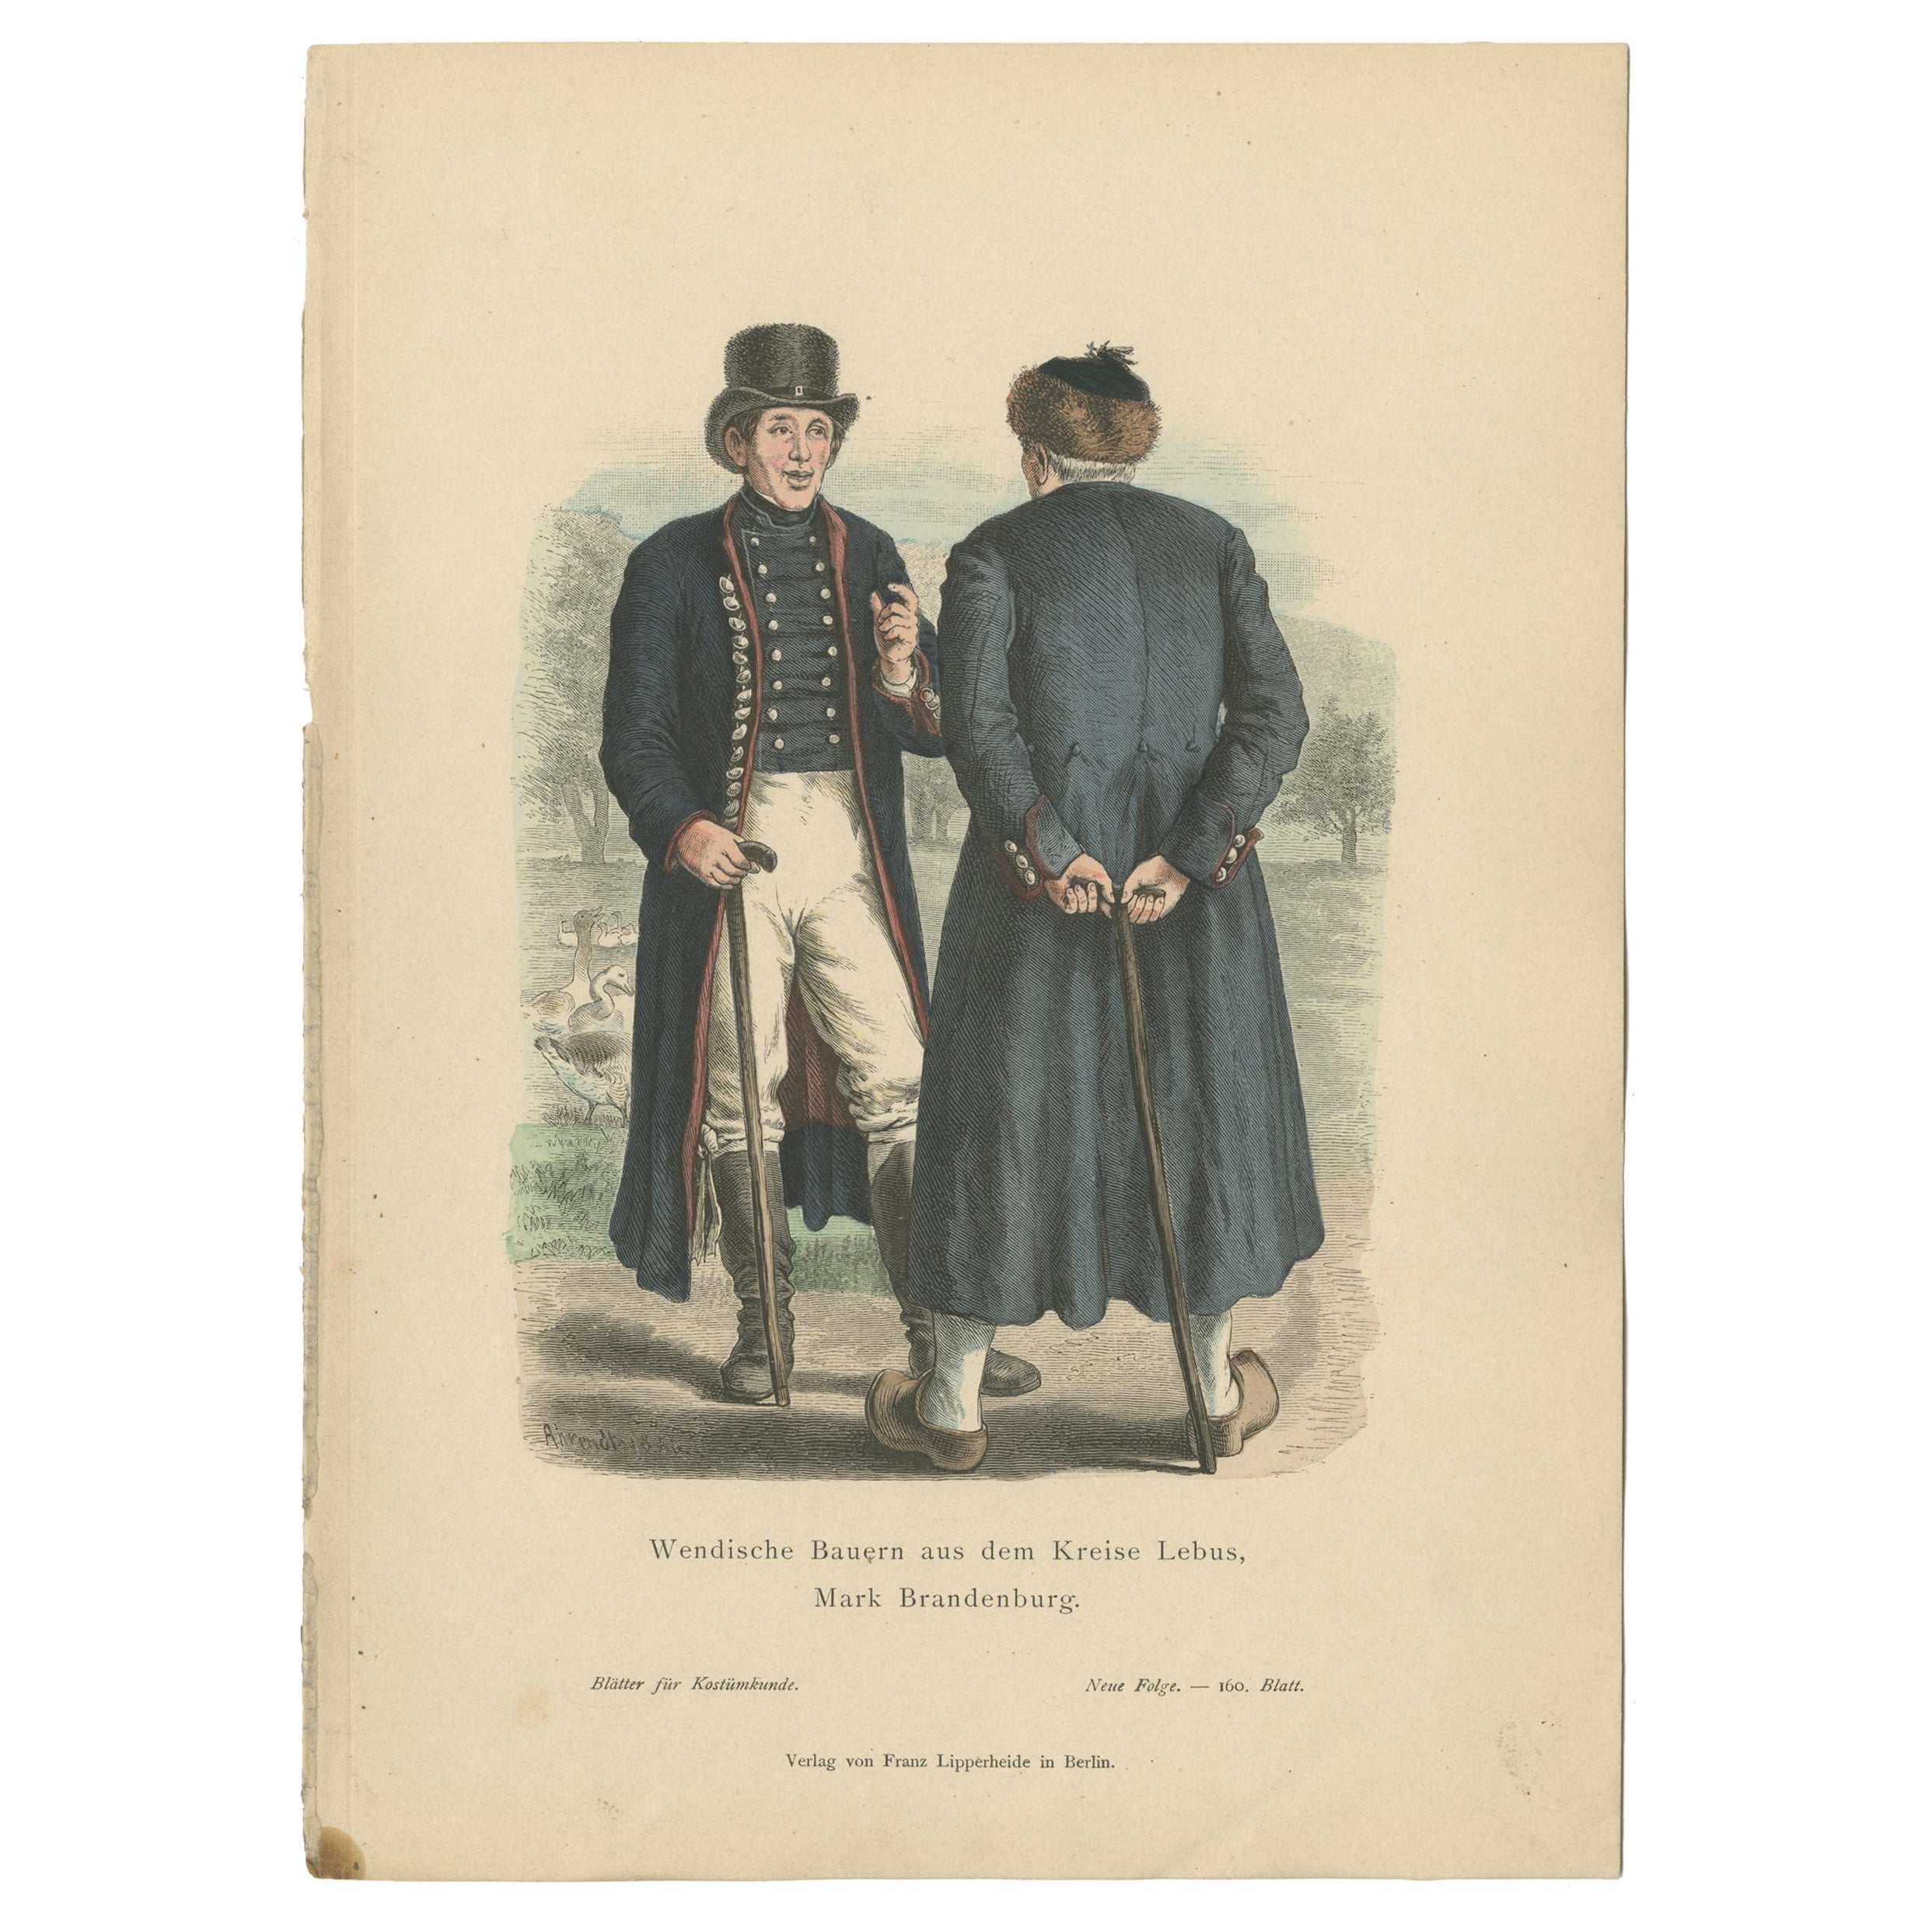 Antique Costume Print of Farmers from the Region of Lebus, Poland, c.1880